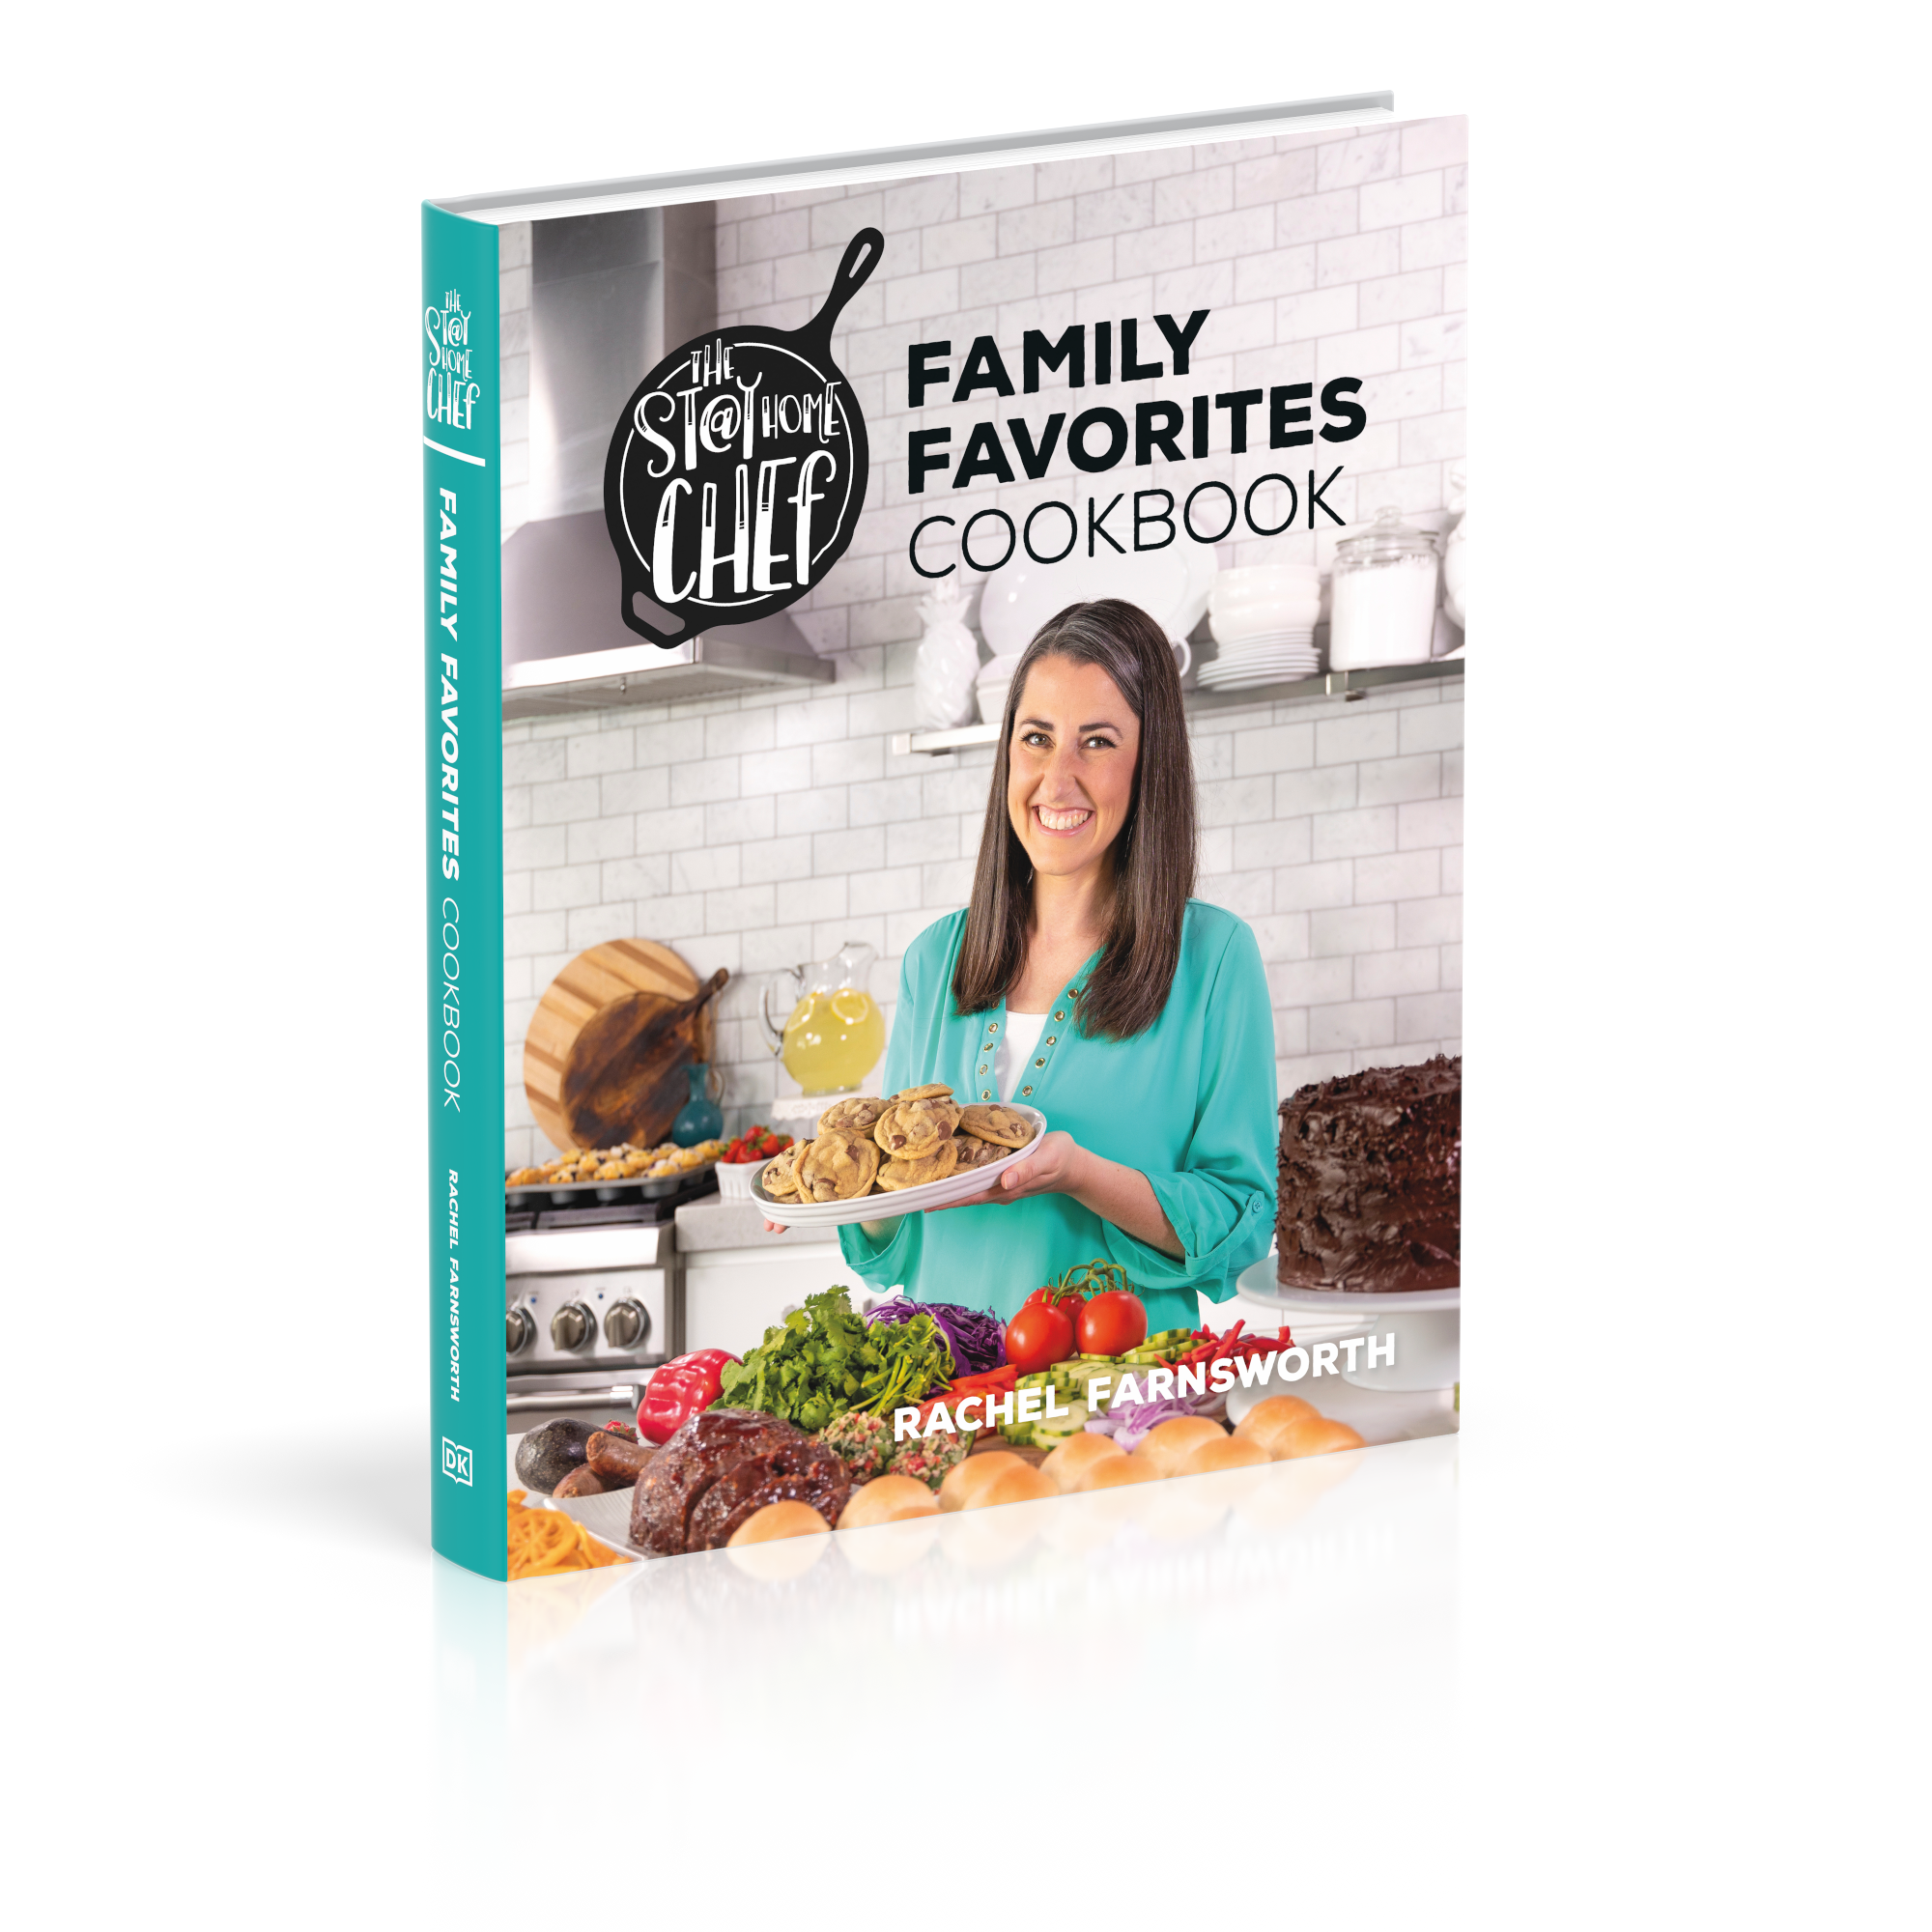 Cookbook cover for The Stay At Home Chef Family Favorites Cookbook featuring Rachel holding a plate of chocolate chip cookies surrounded by other prepared recipes from the book.